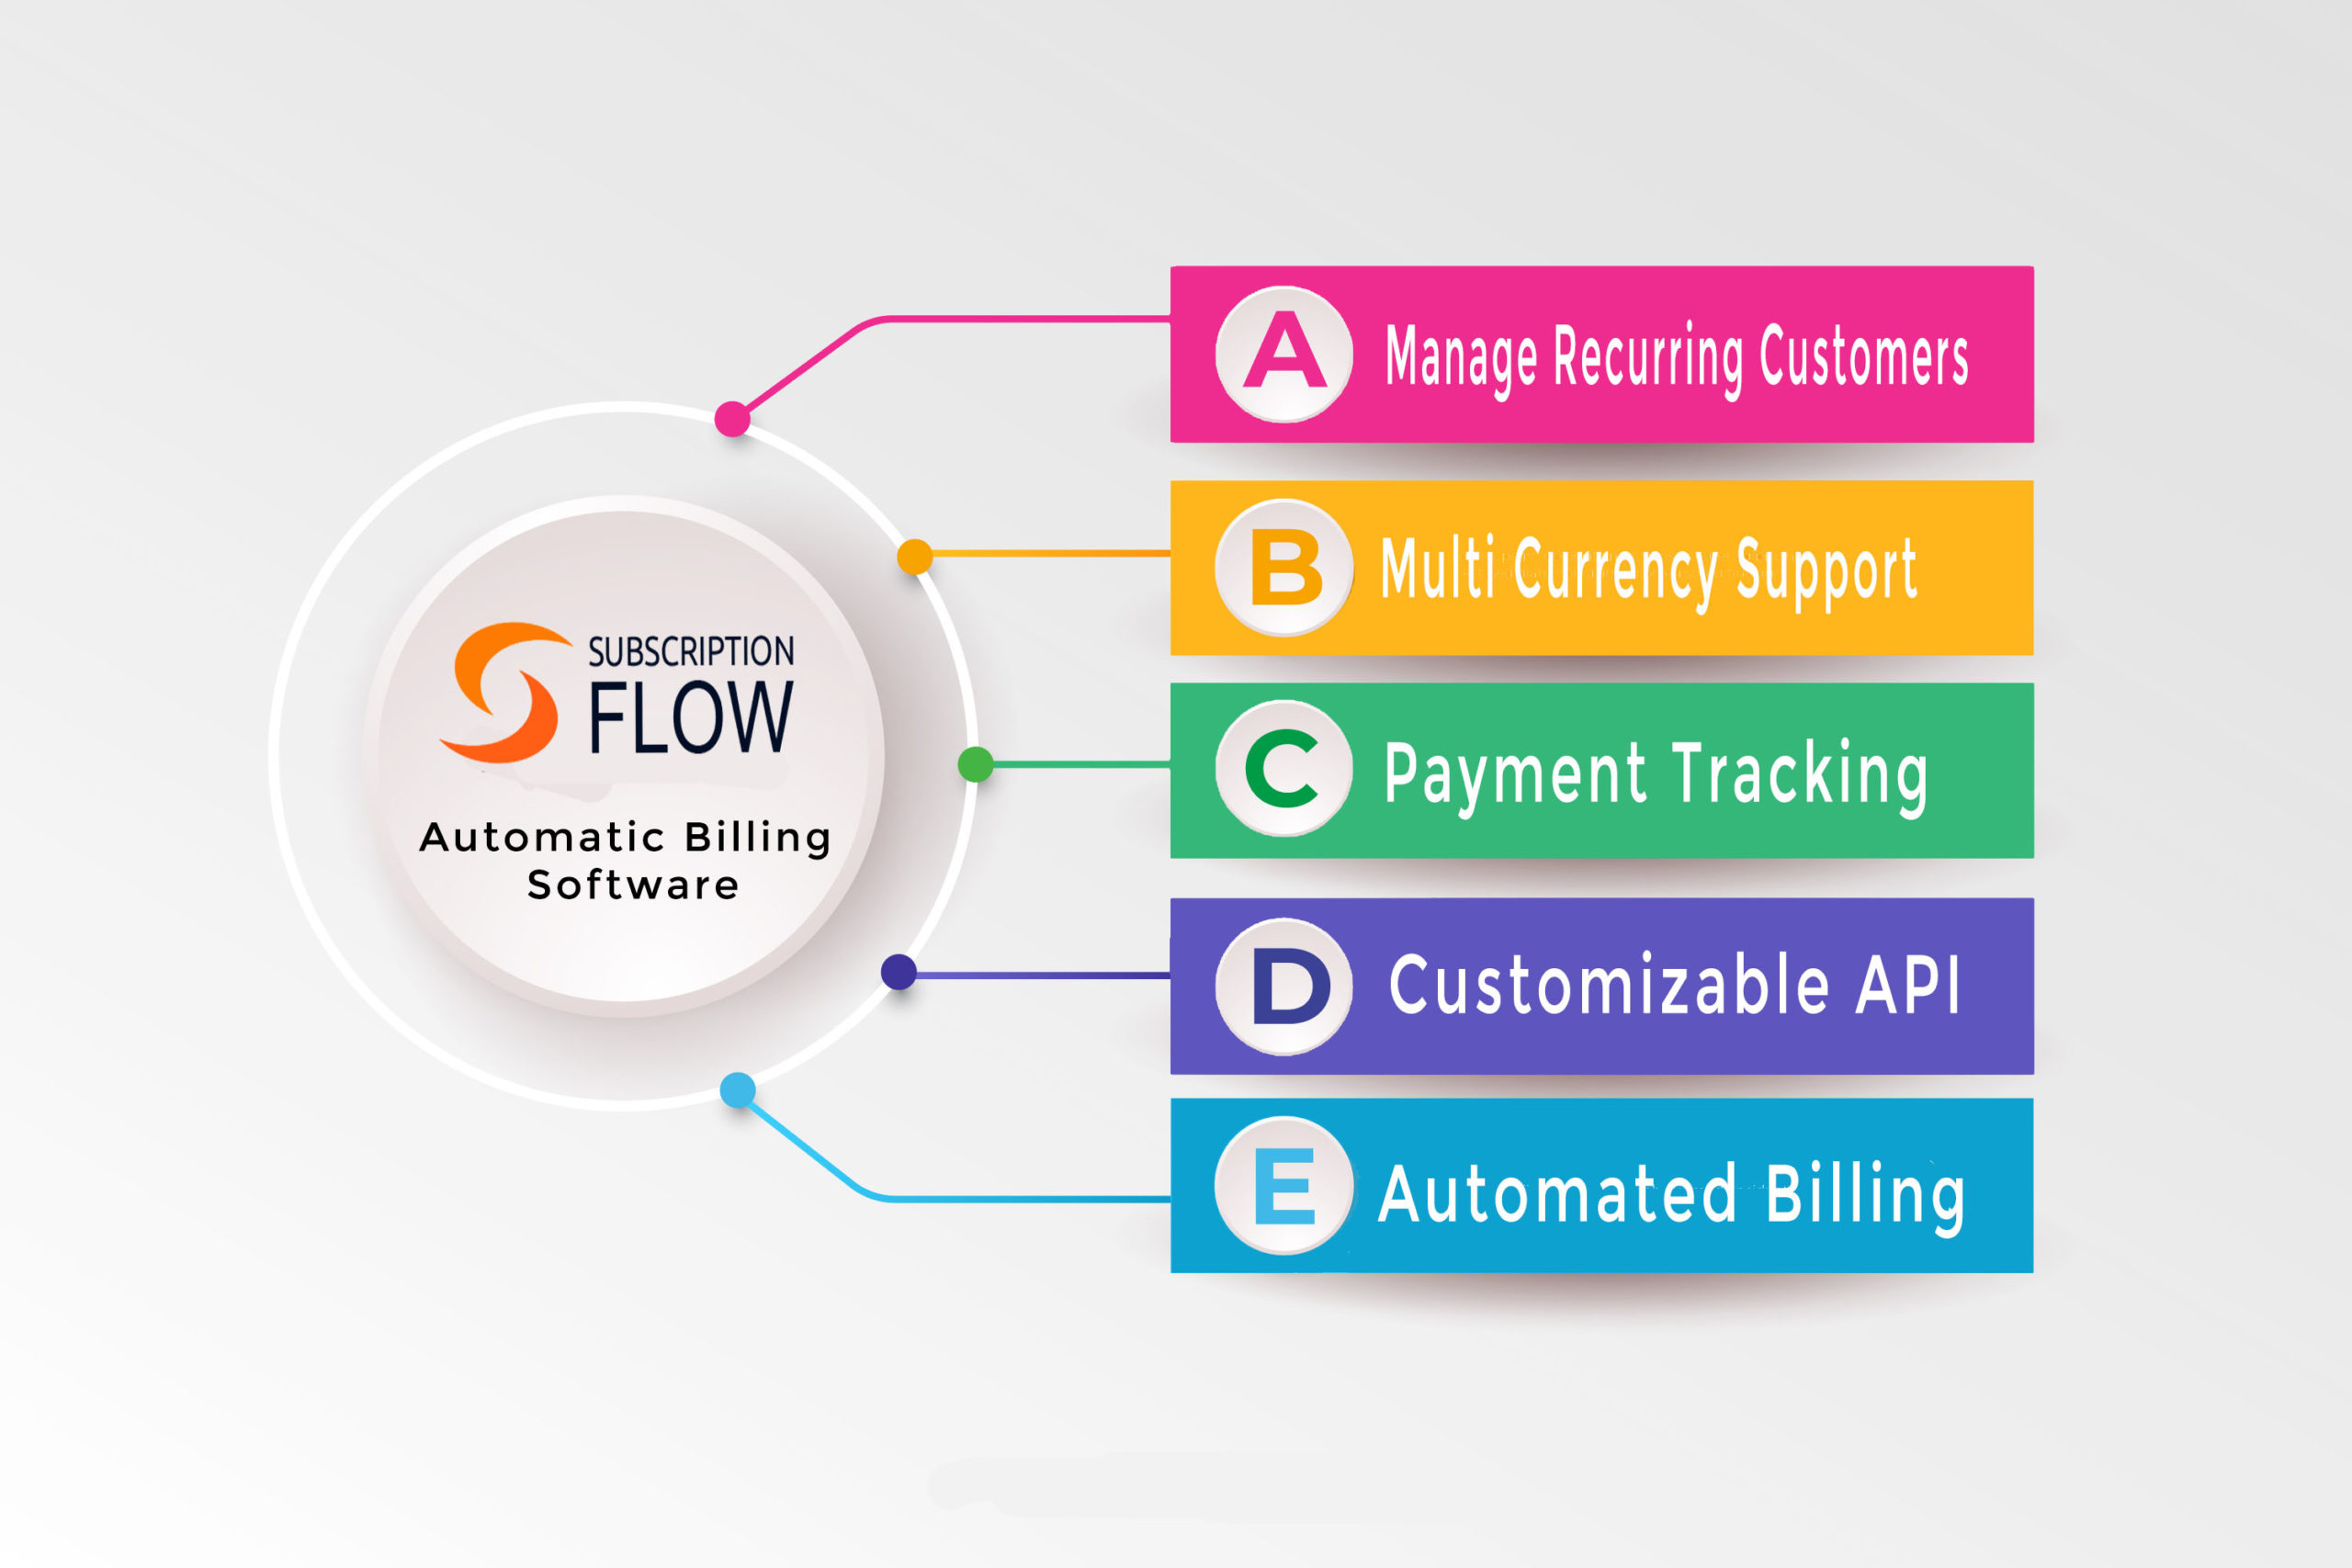 Subscriptionflow automated billing software